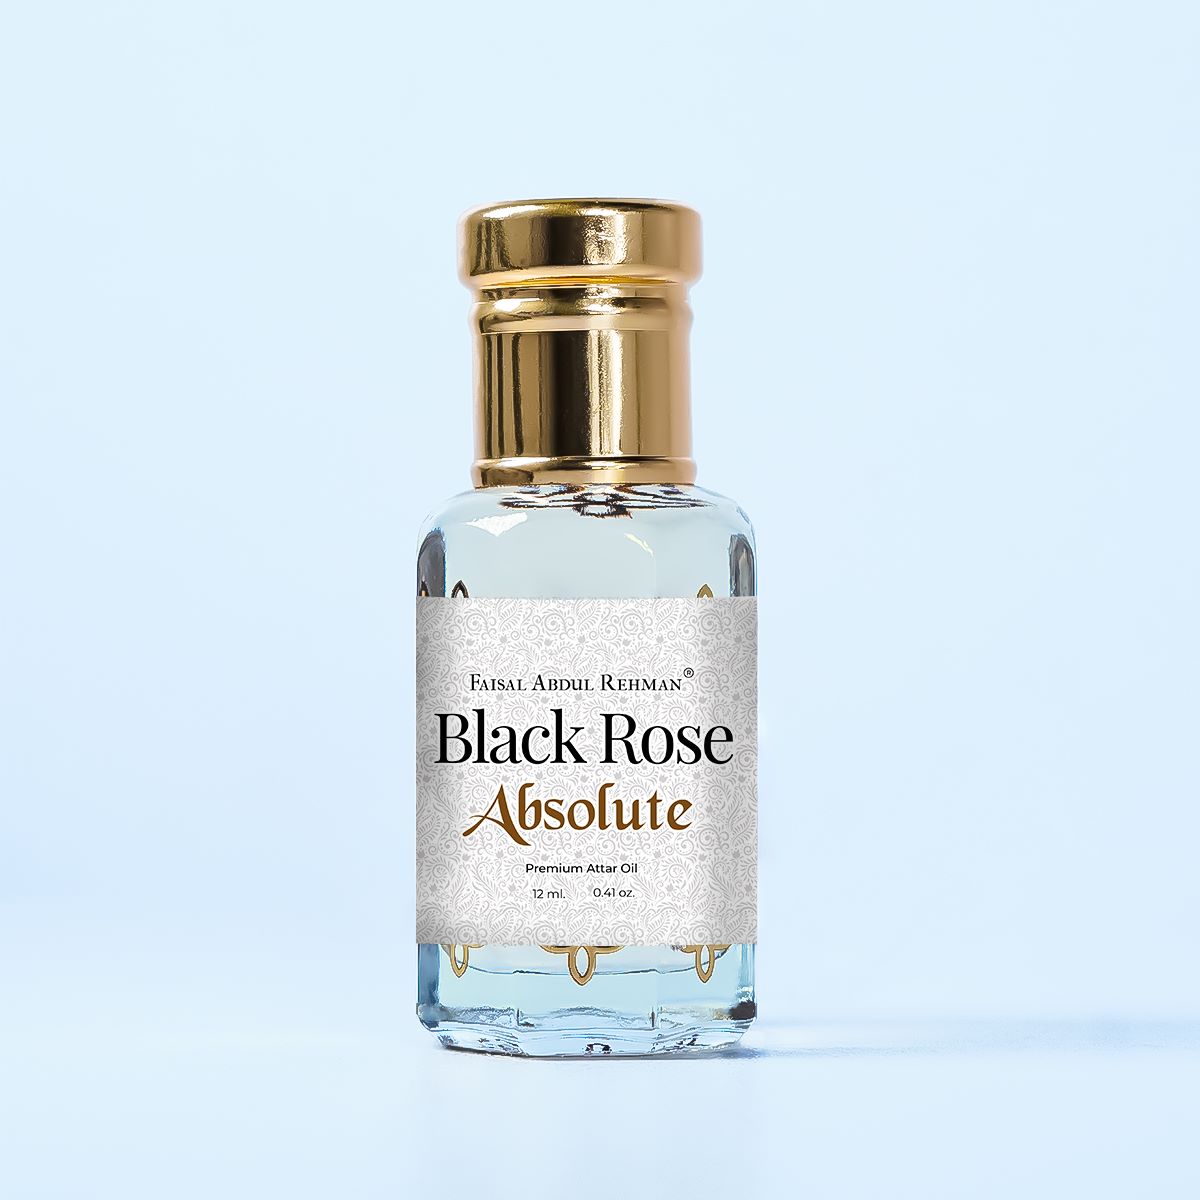 Black Rose Absolute, Pink Rose Absolute Oil, Red Rose Absolute Oil 12ml Each, Pack Of 3- Faisal Abdul Rehman Attar